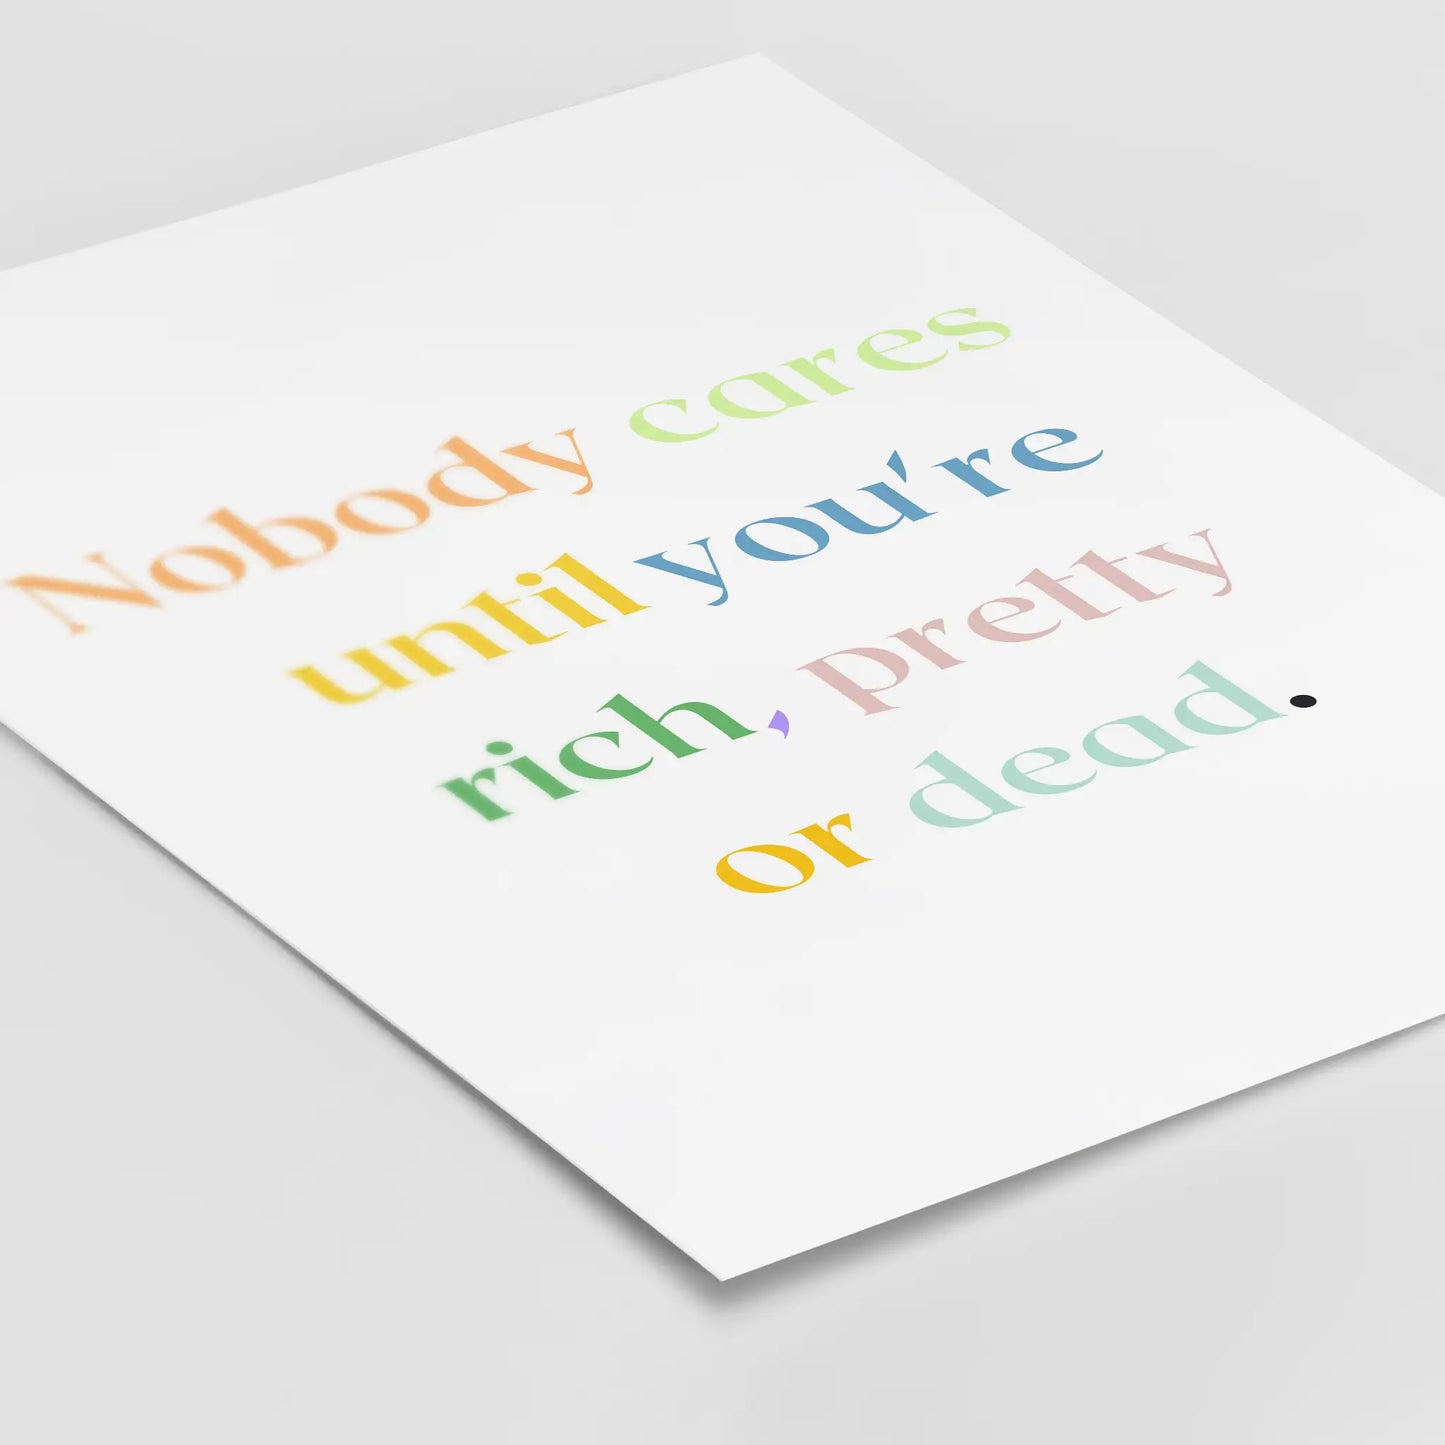 Nobody Cares Until You Are Rich, Pretty Or Dead - Poster